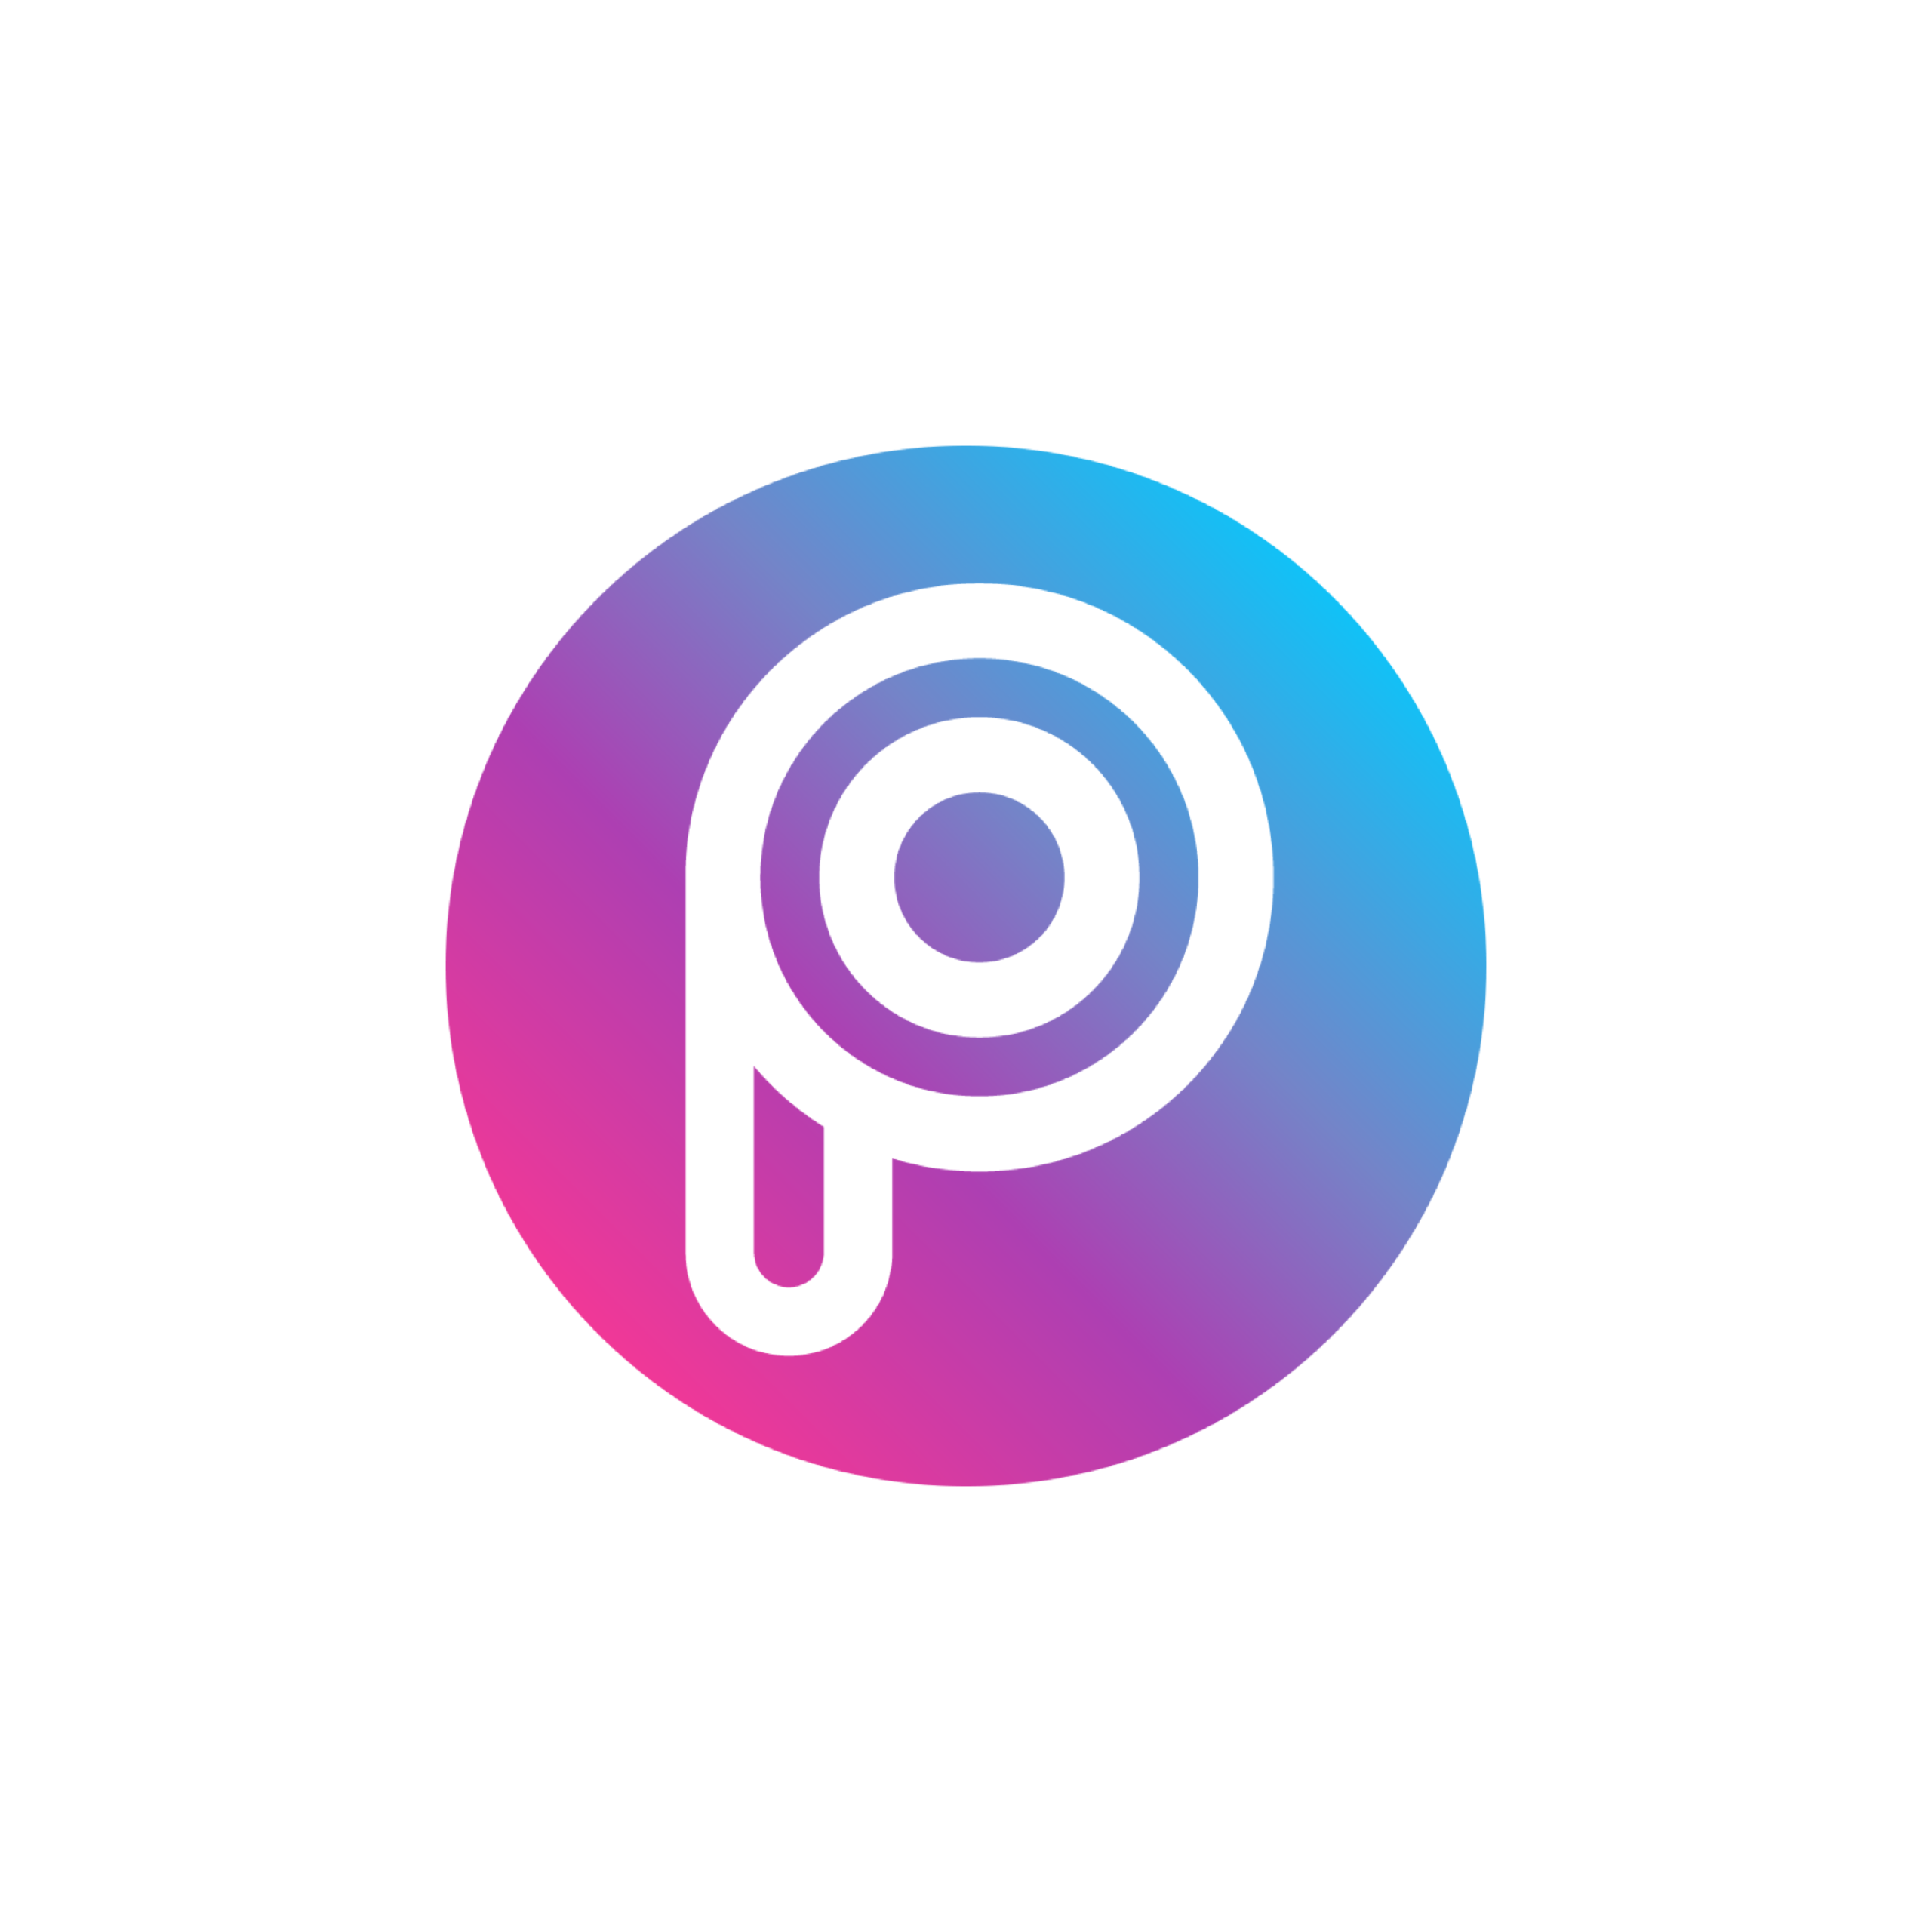 Image Result For Png Logos For Picsart Png Text Png Images For Editing